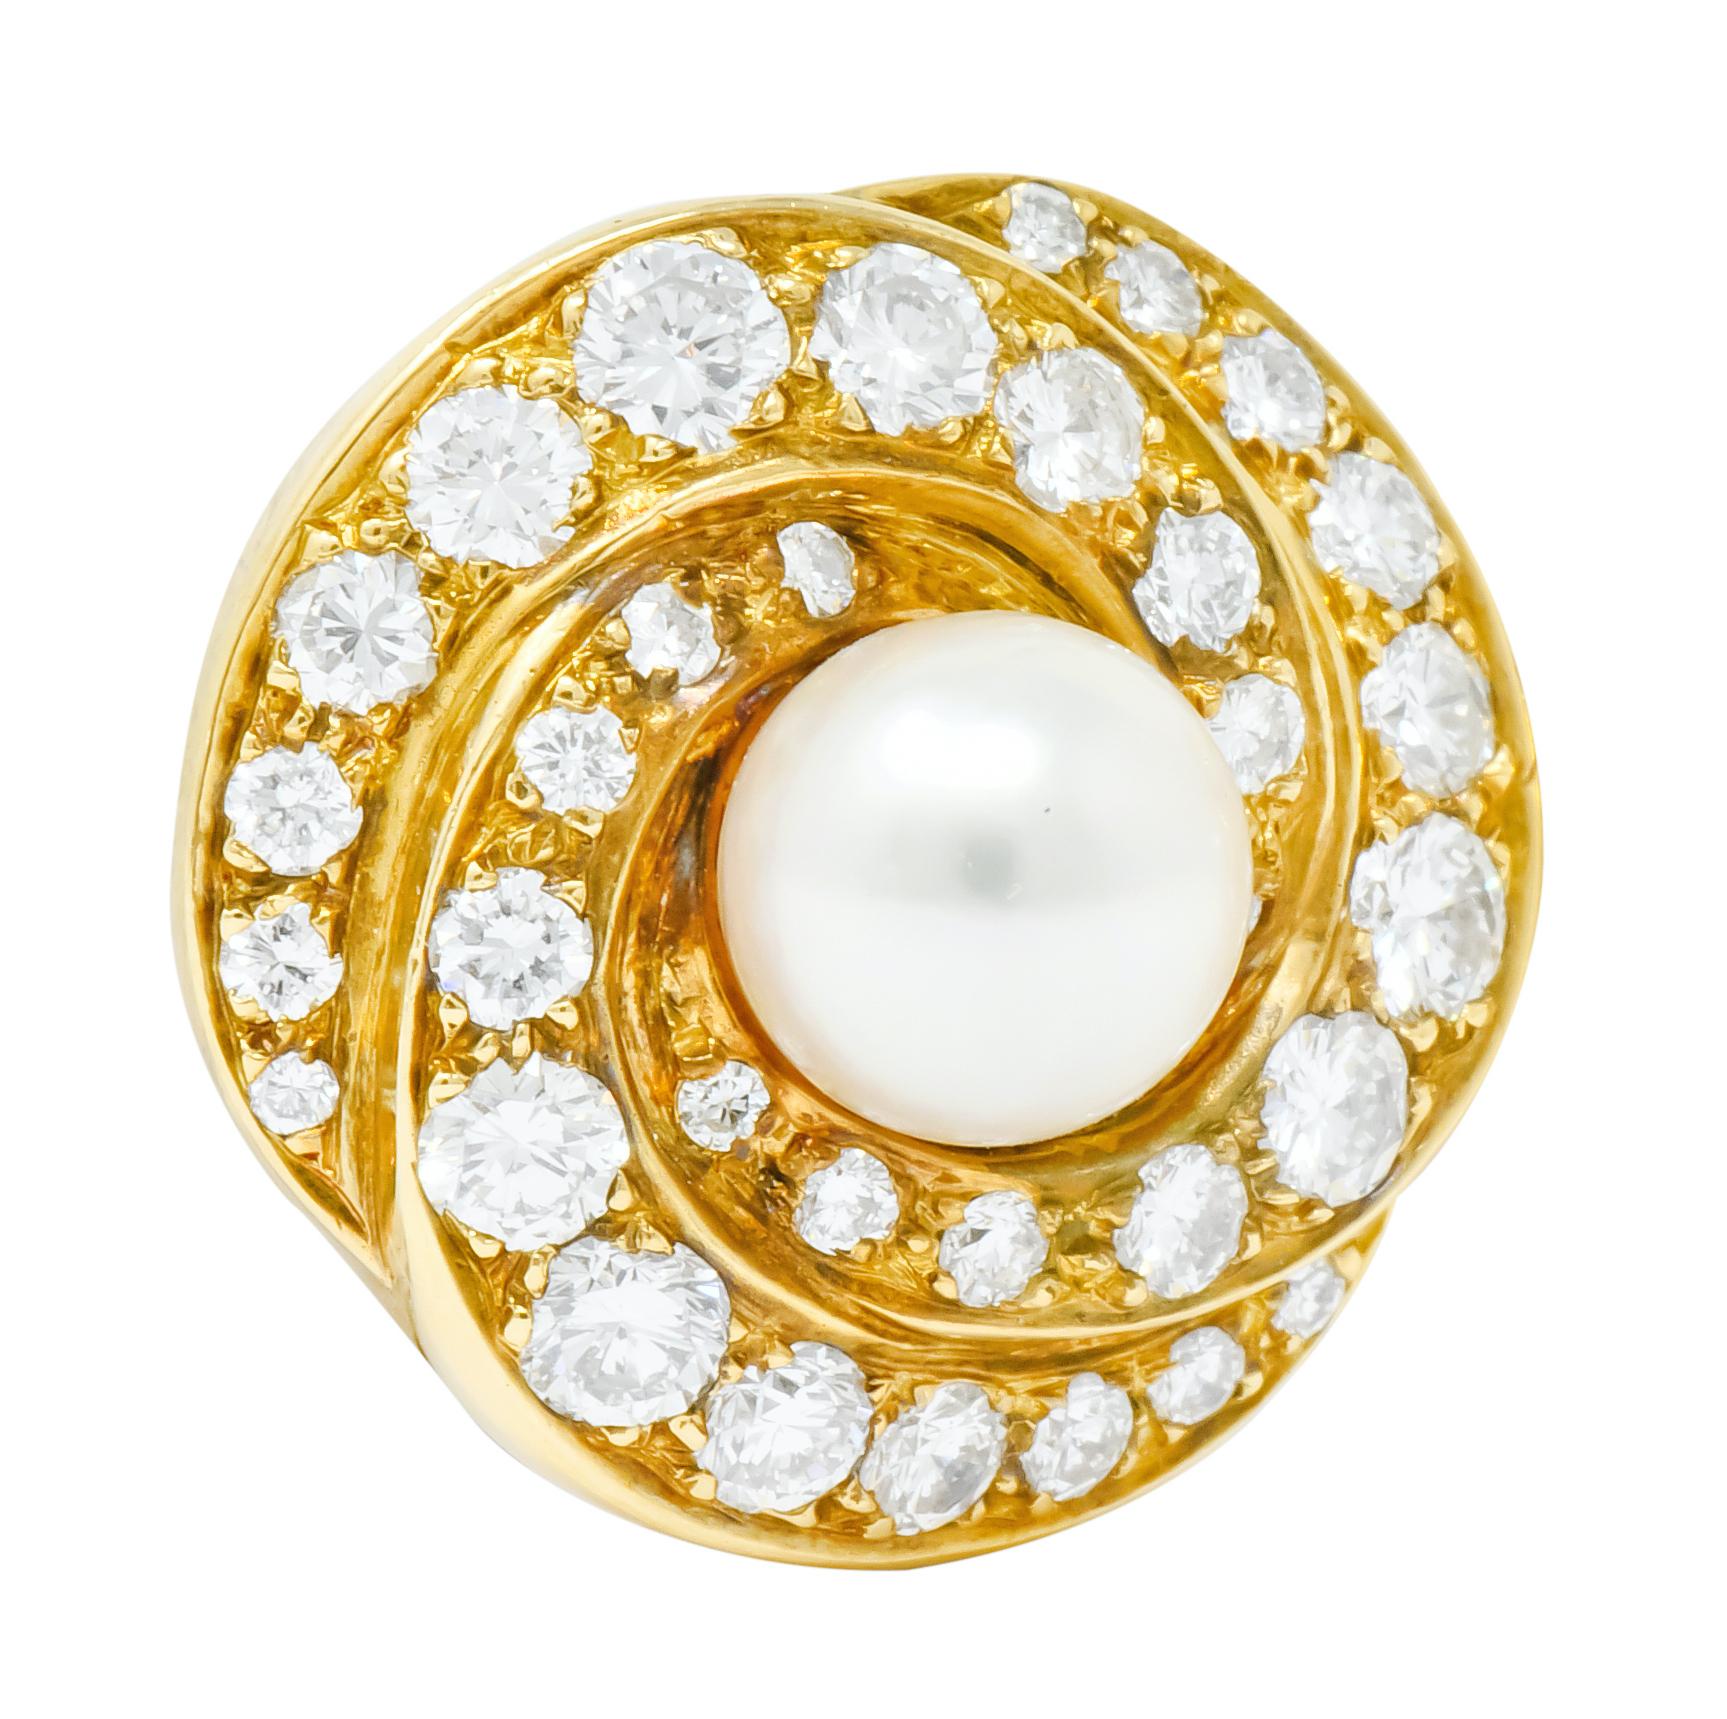 Each centering a round, cultured button pearl measuring approximately 6.8 mm, cream in body color with rose overtones and excellent luster

Surrounded by round brilliant cut diamonds weighing approximately 2.15 carats total, G to I color and VS